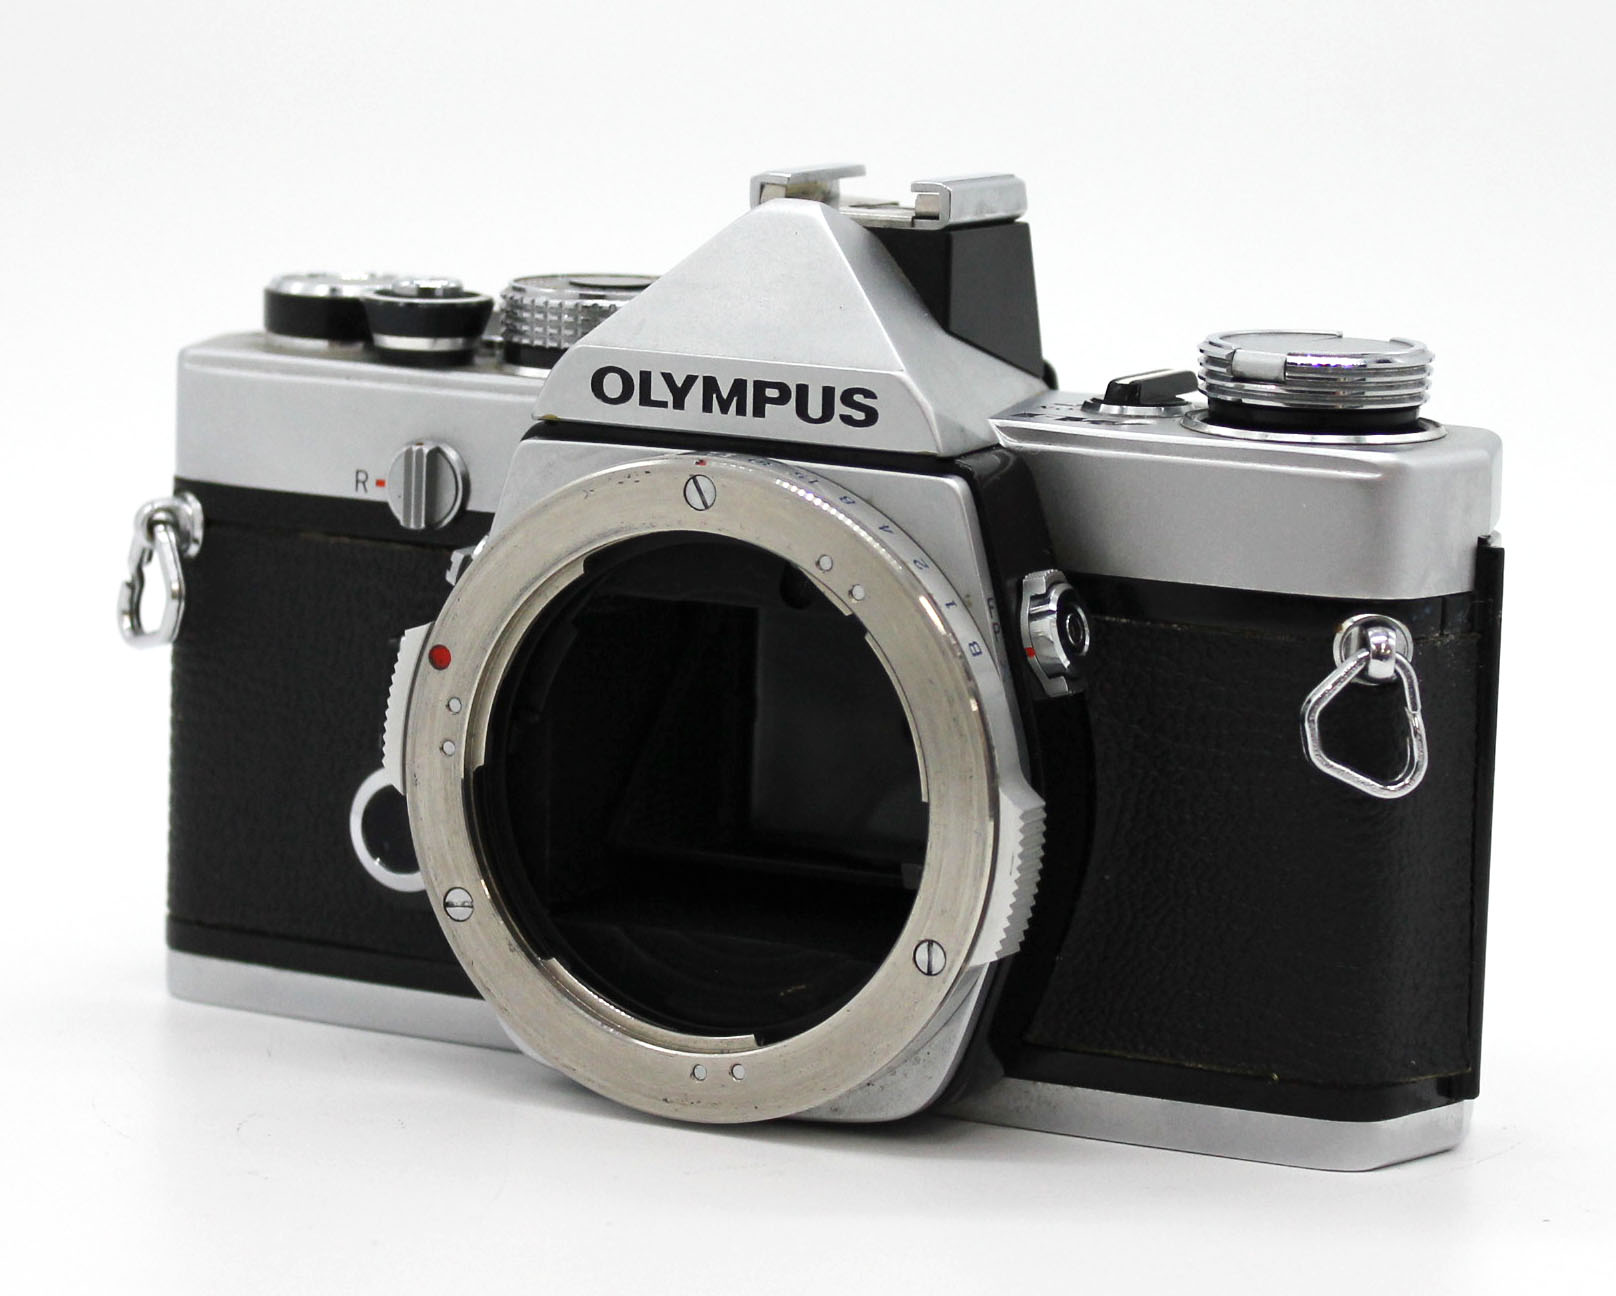 Olympus M-1 35mm SLR Film Camera with G.Zuiko Auto-W 28mm F/3.5 Lens from Japan Photo 1